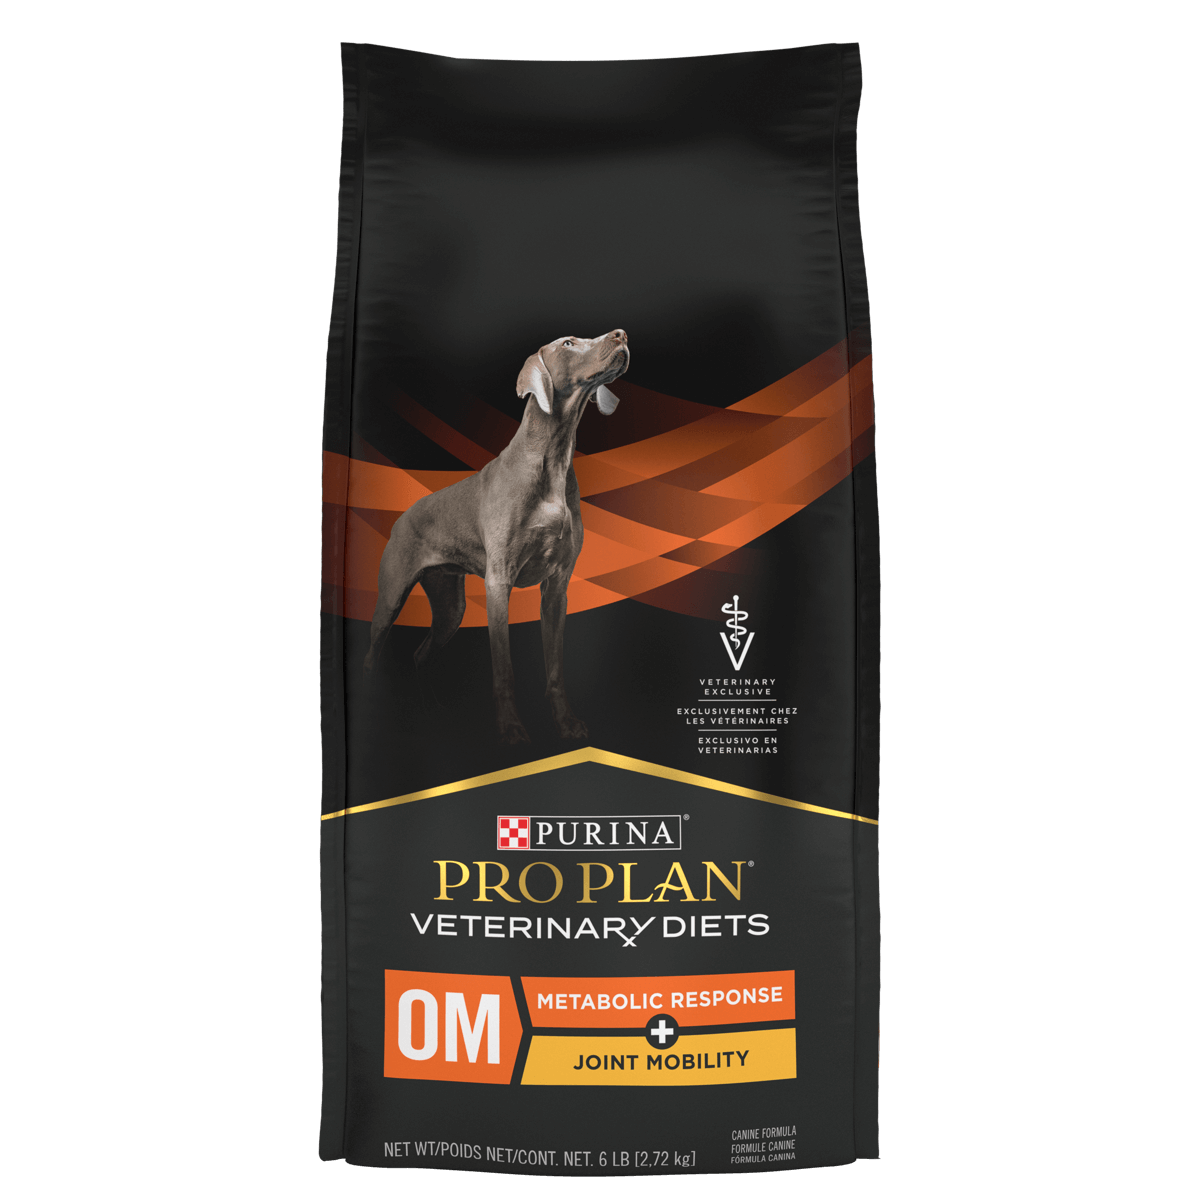 OM Metabolic Response Plus Joint Mobility Dry Dog Food Formula